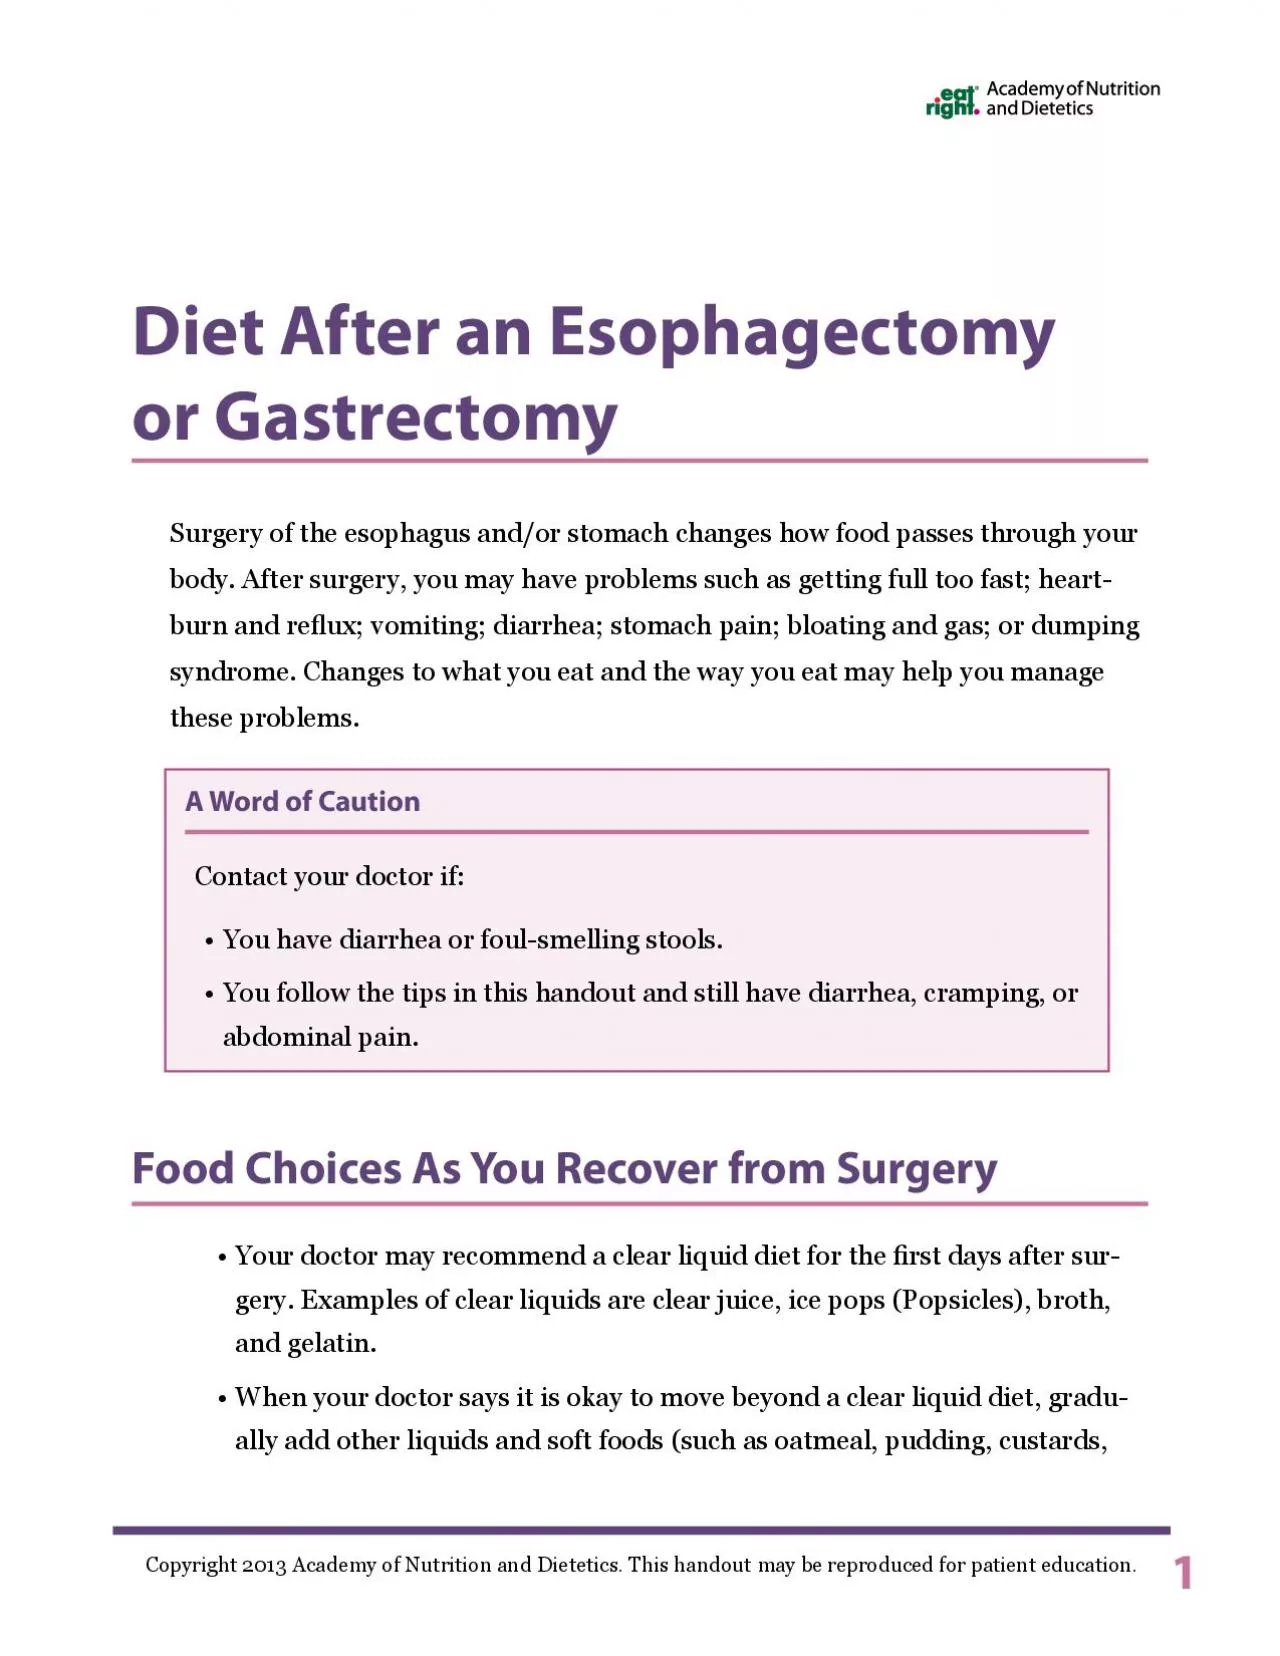 Diet After an Esophagectomy or GastrectomyFood Choices As You Recover